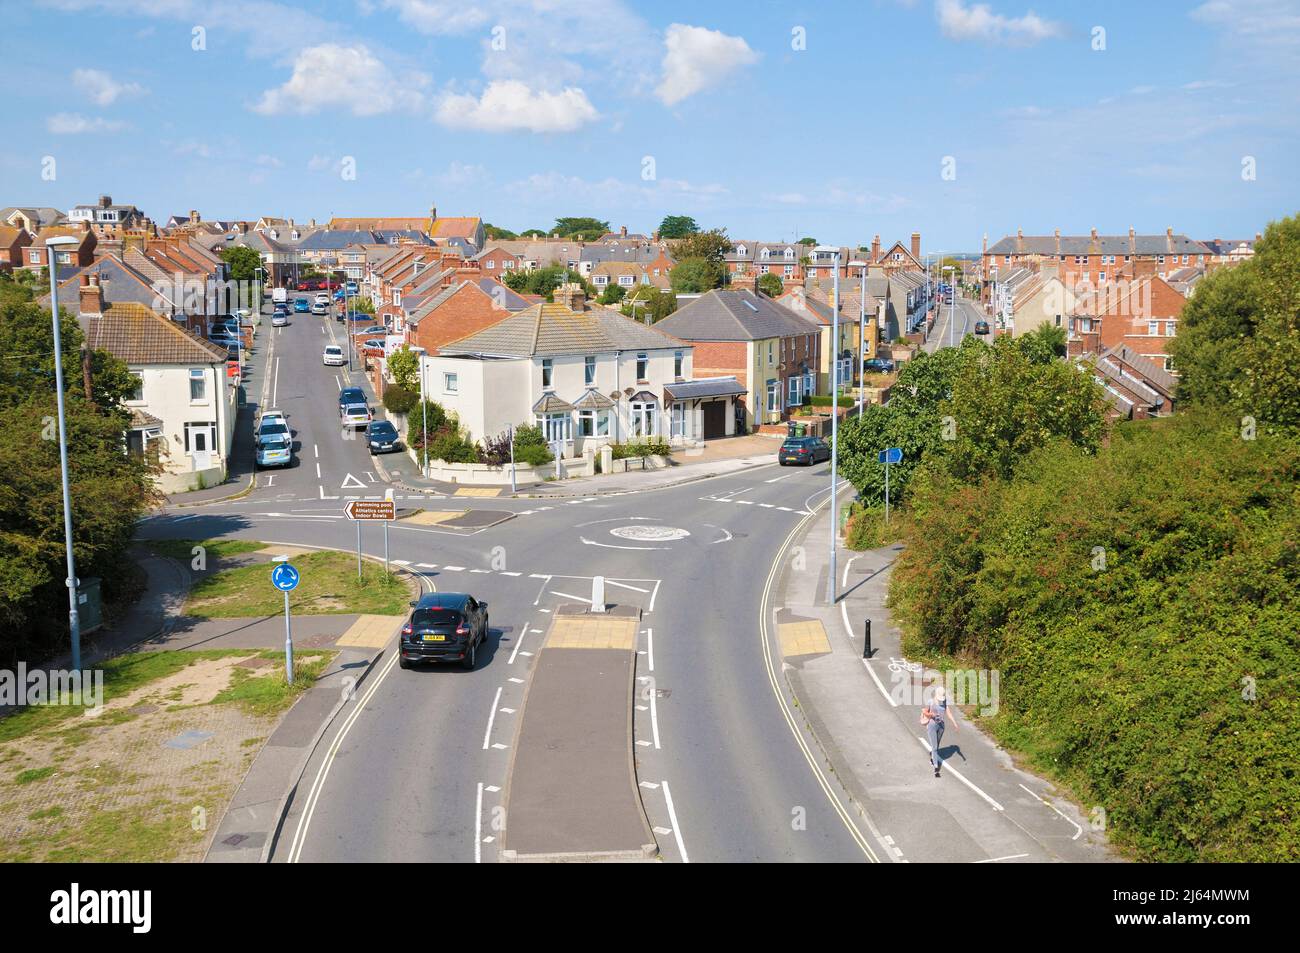 Elevated view of residential streets and semi-detached houses with mini-roundabout and road junction on the outskirts of Weymouth, Dorset, England, UK Stock Photo